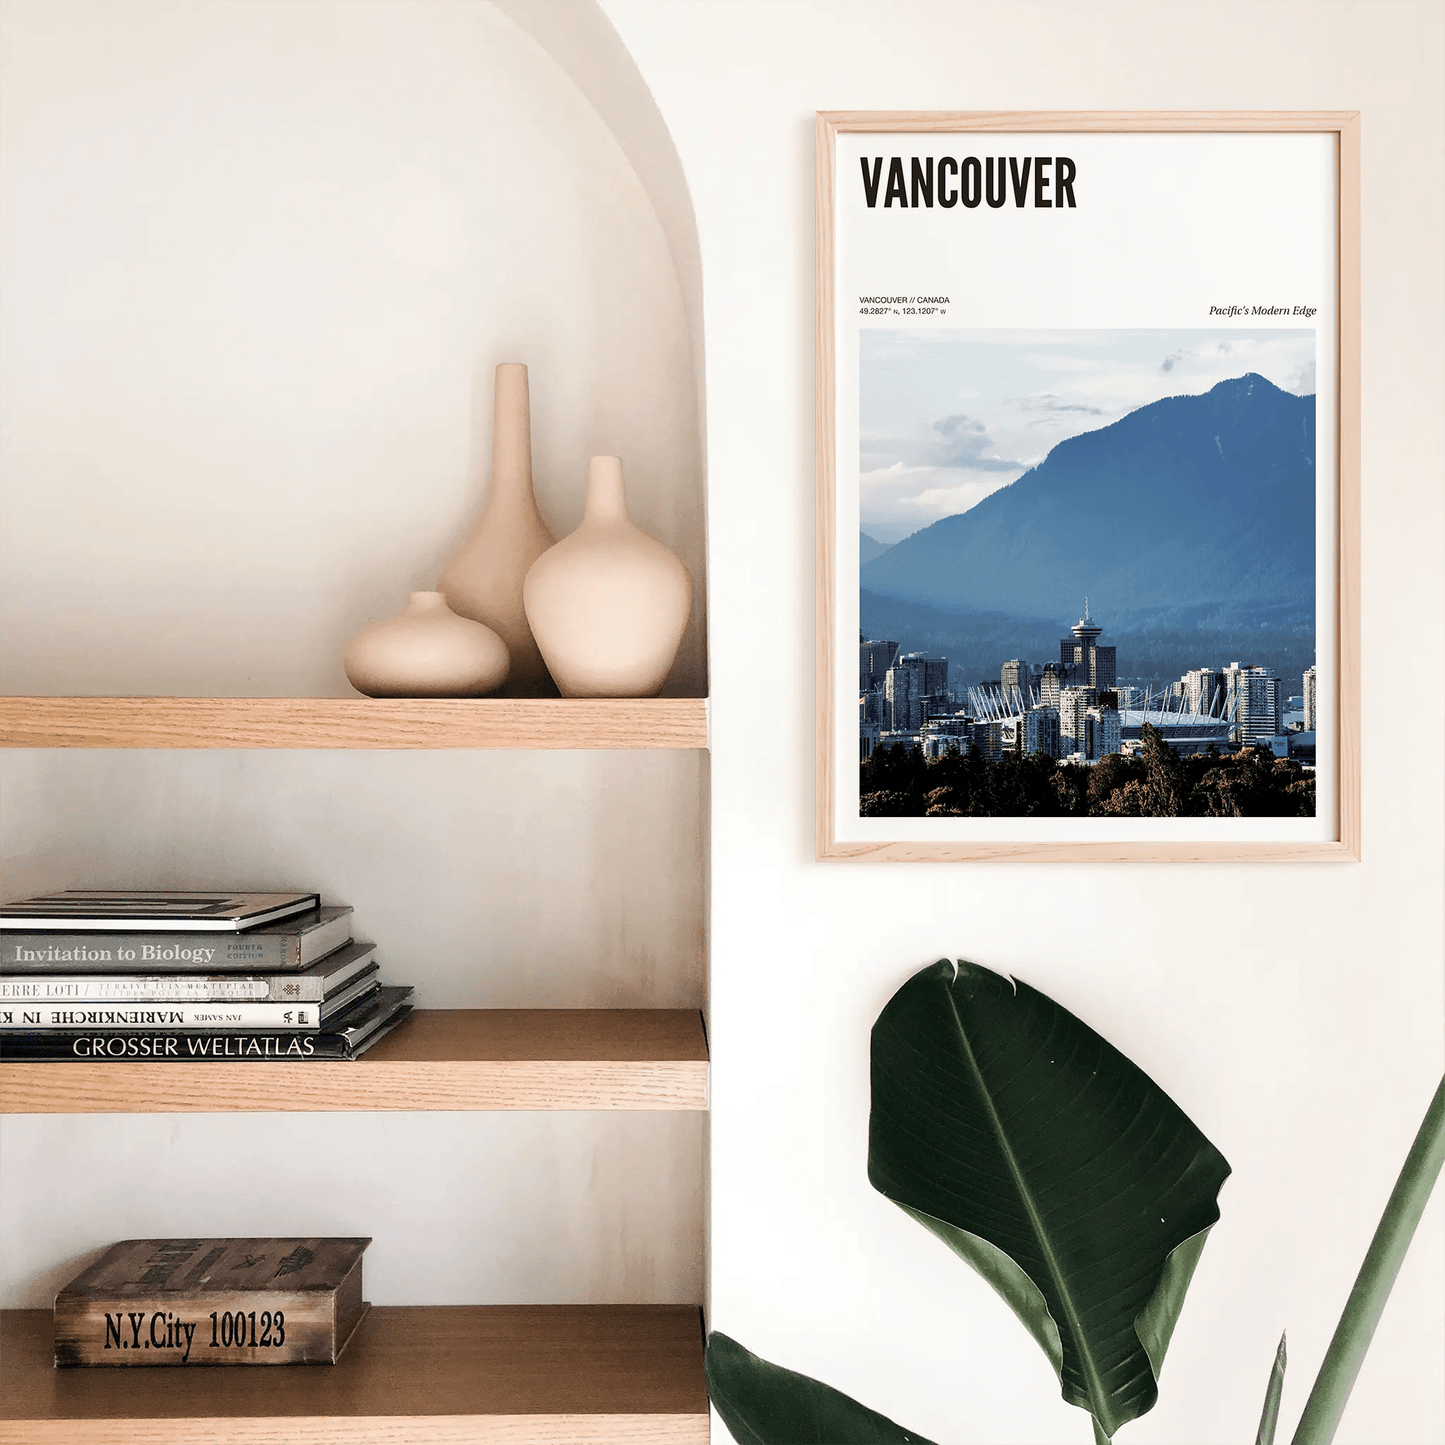 Vancouver Odyssey Poster - The Globe Gallery